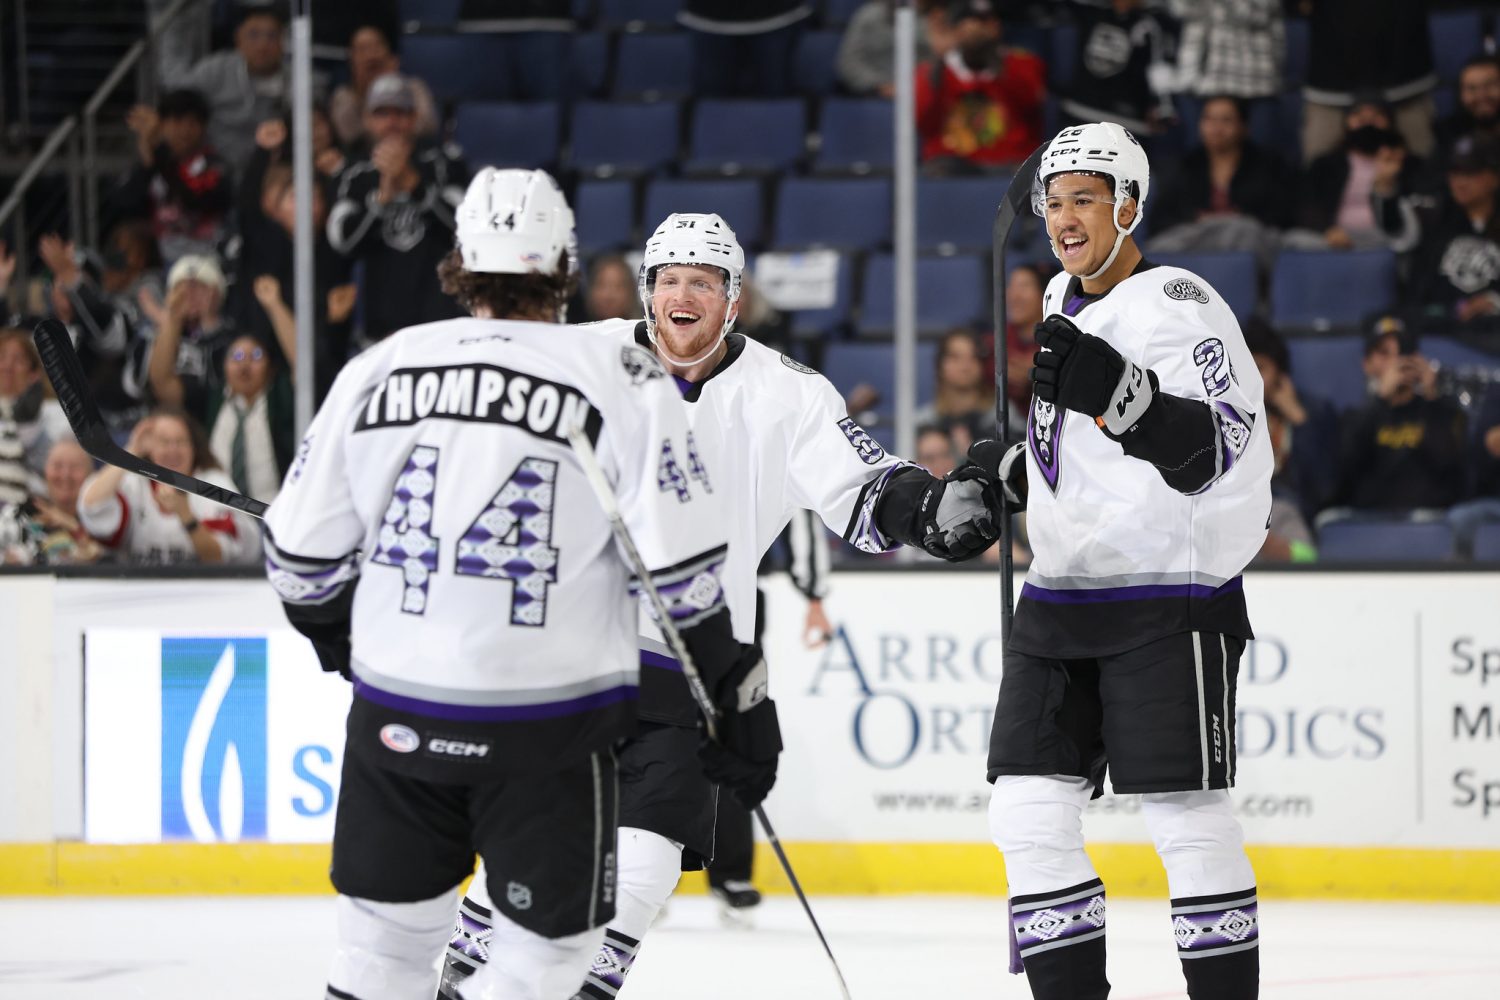 Vilardi, Quick carry Kings to 1-0 win over Wild - The San Diego